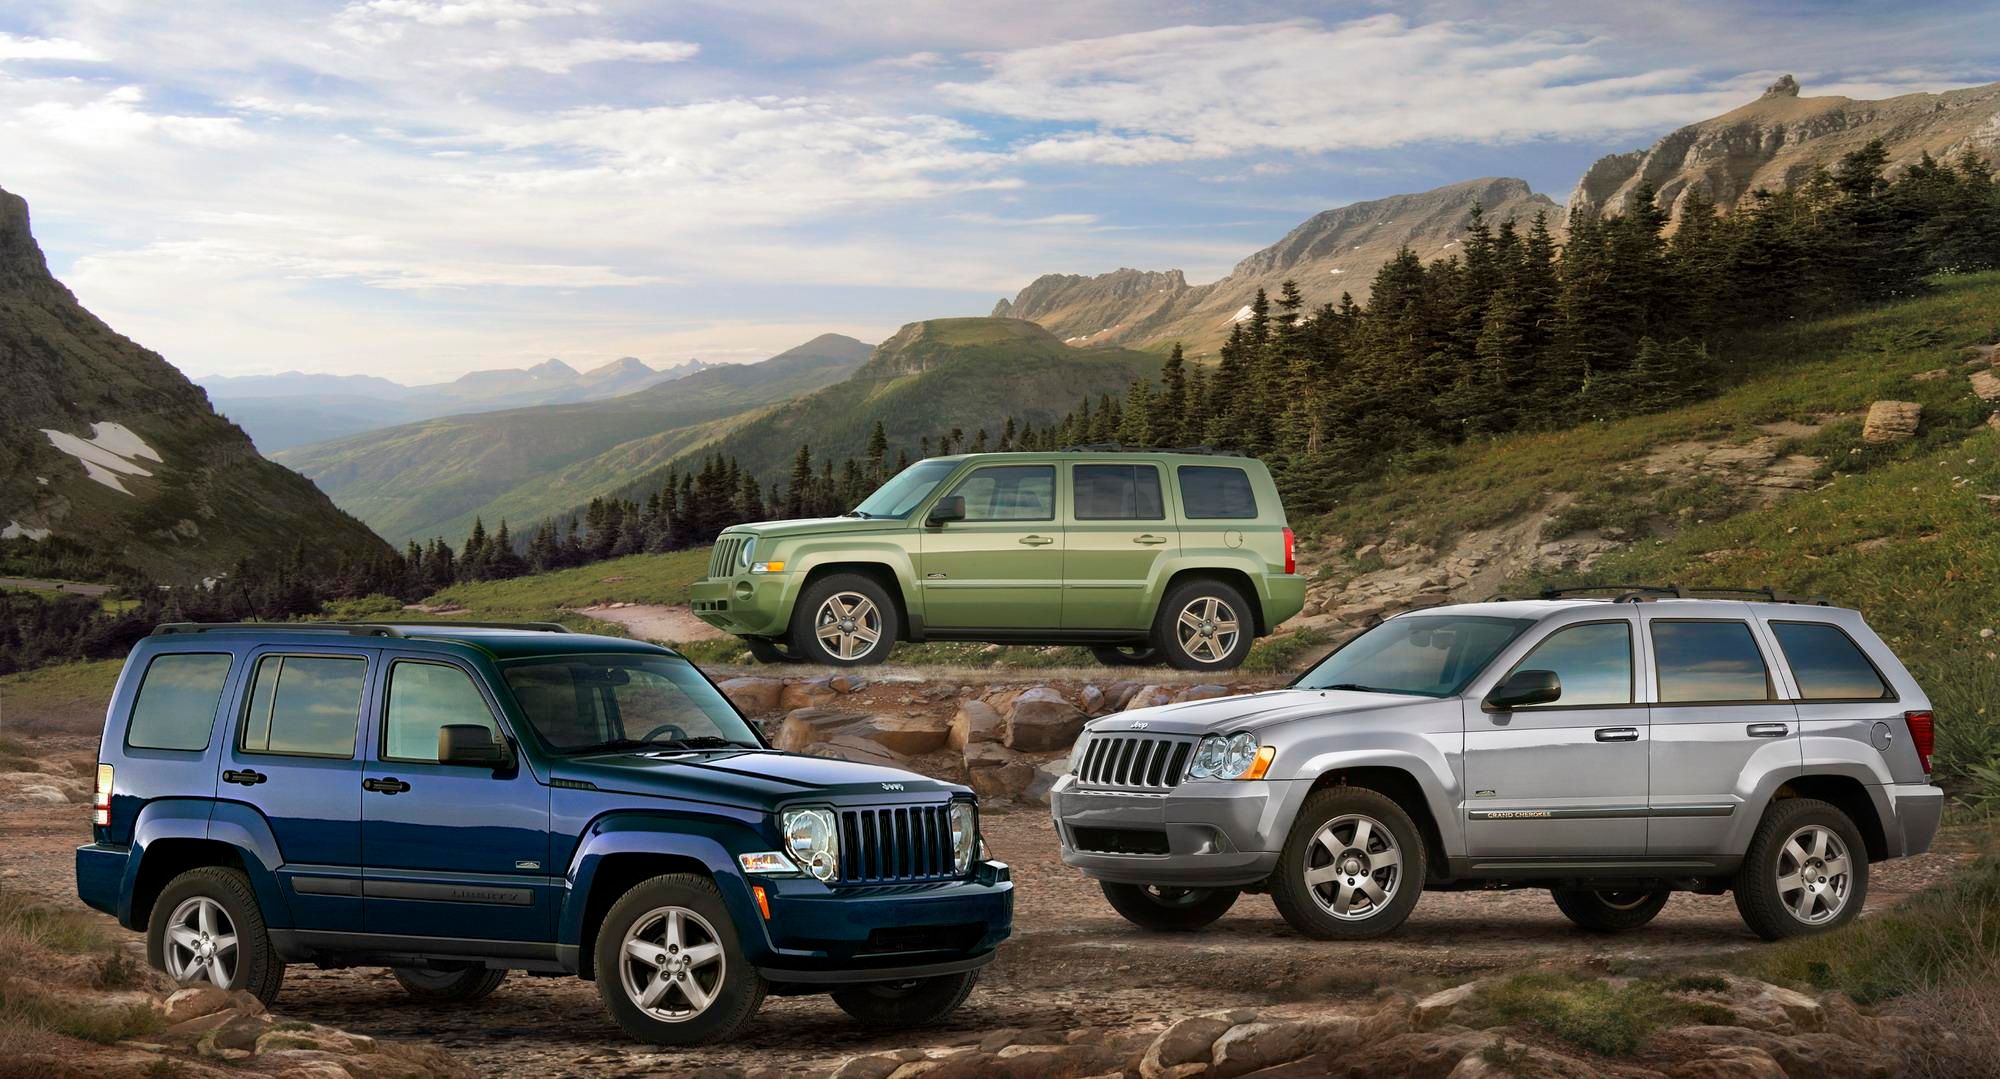 2009 Jeep Patriot, Liberty and Grand Cherokee Rocky Mountain Edition